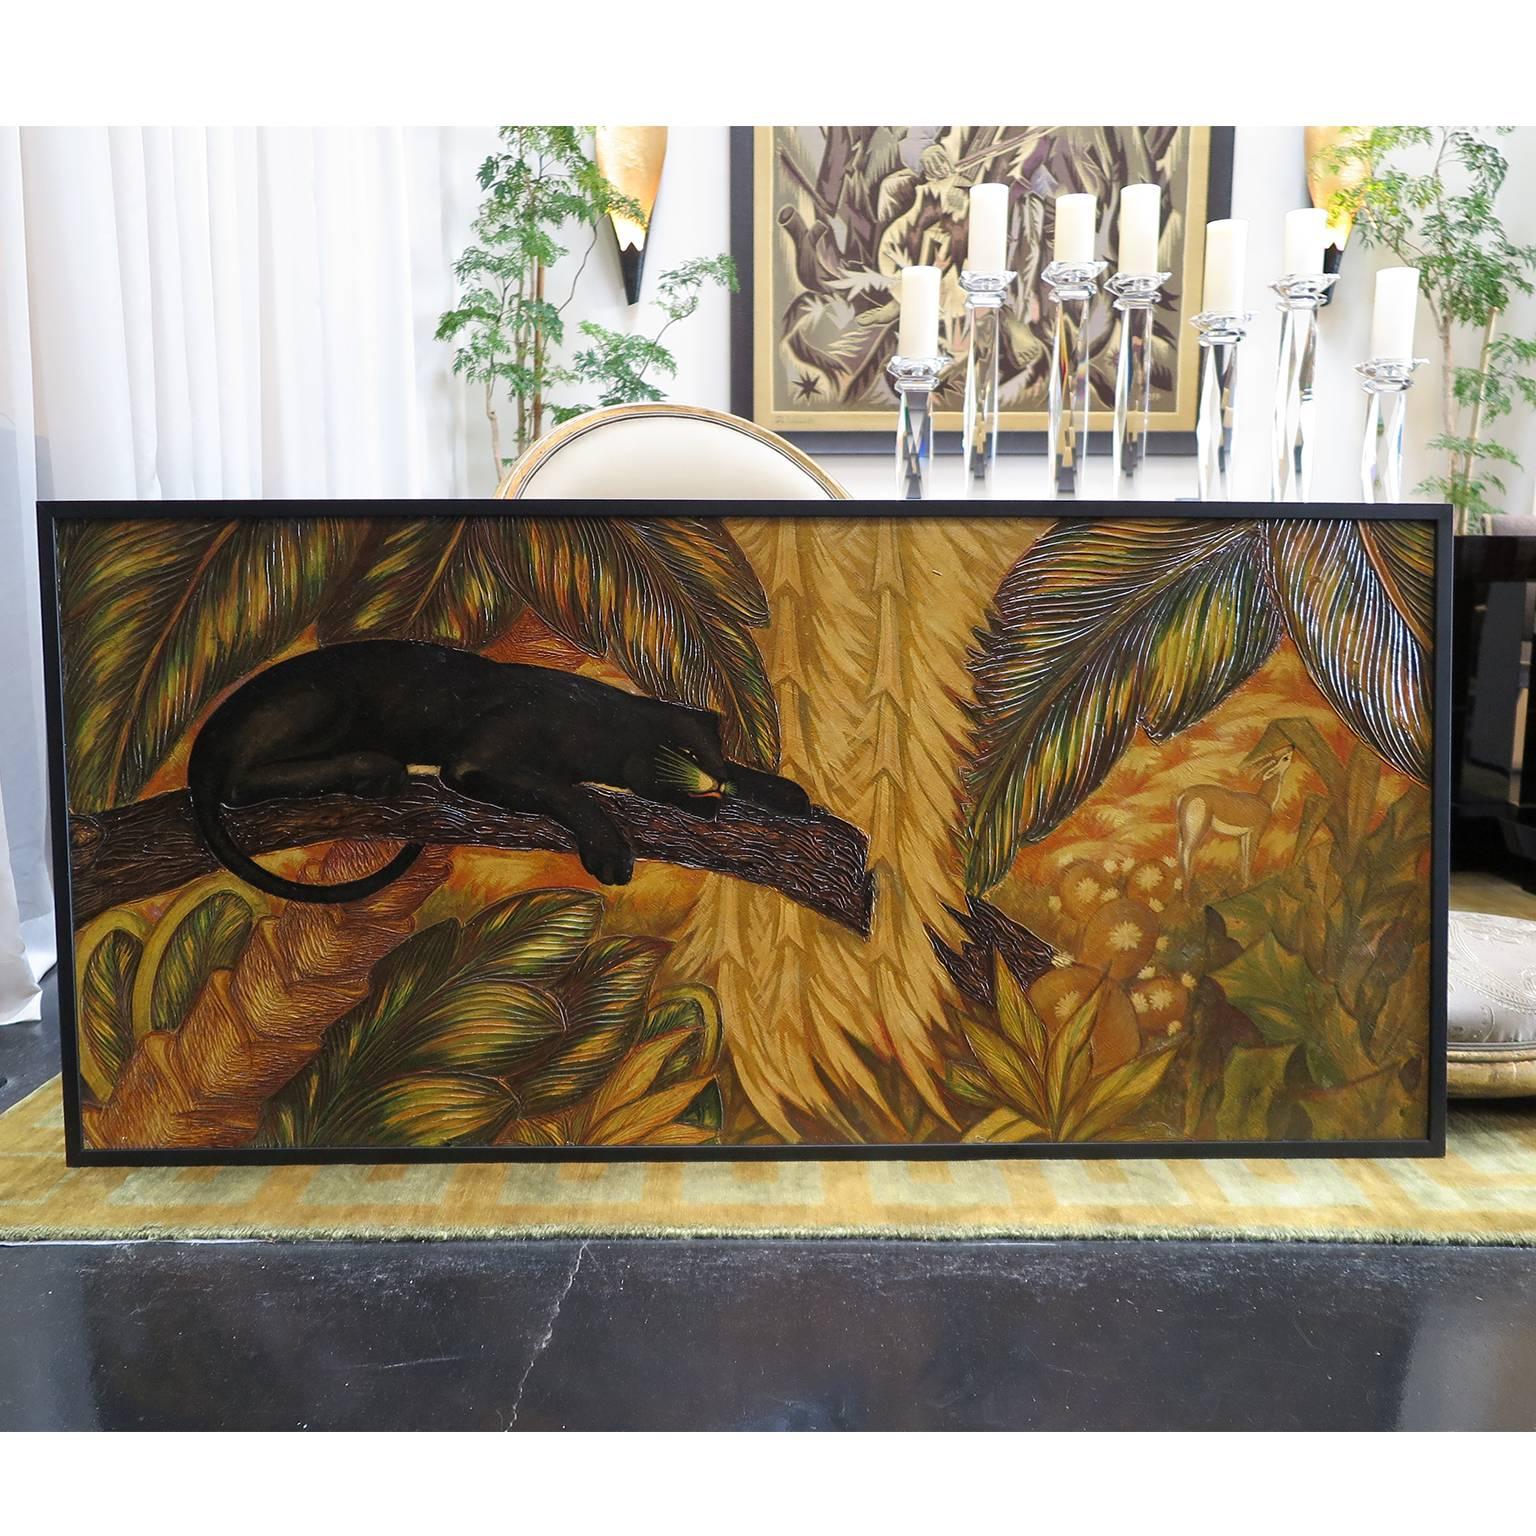 French Art Deco panel of panther on branch observing a deer. Acrylic on board, relief work, layered paint on plants to add texture and depth. Newly framed in black.